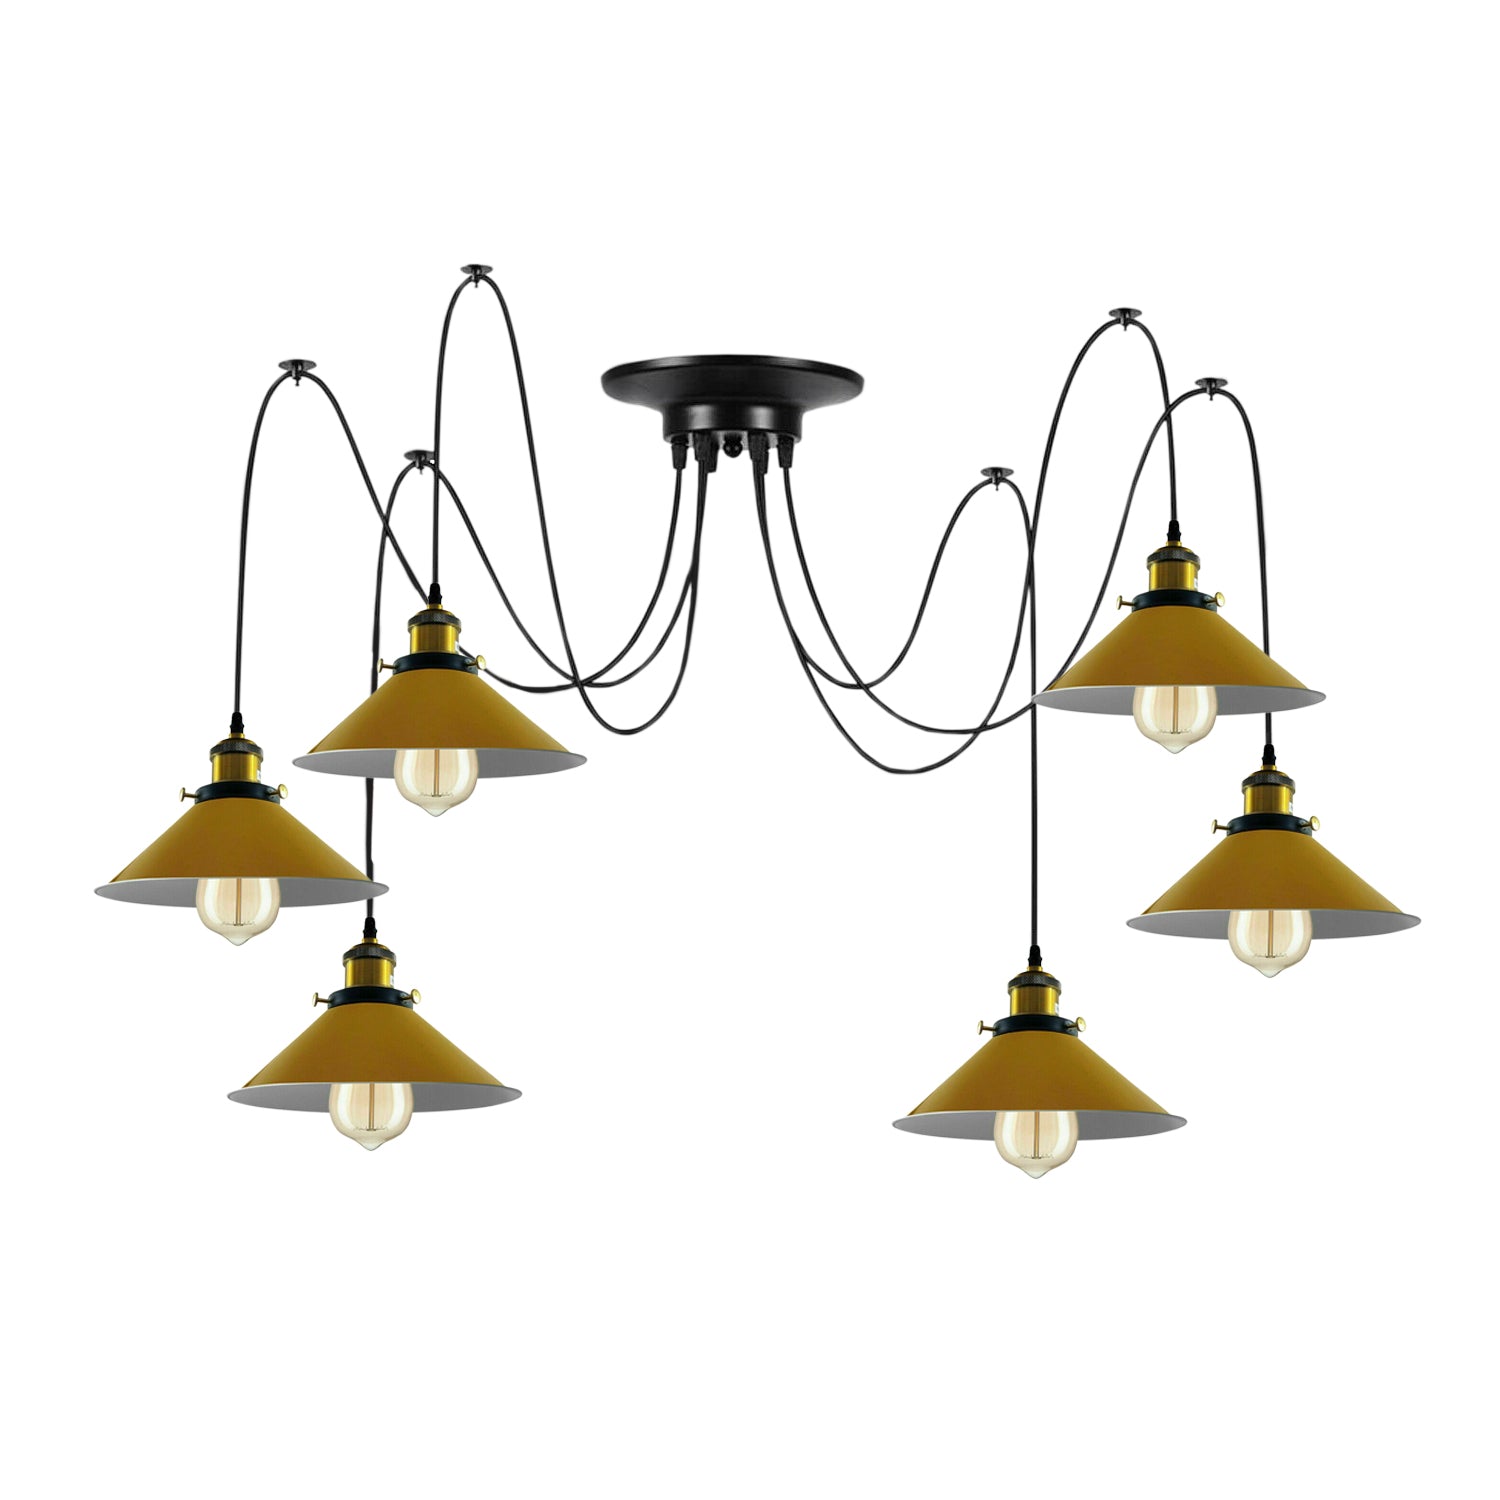 Modern large spider Braided Pendant lamp 6heads Clusters of Hanging Yellow Cone Shades Ceiling Lamp Lighting~3436 - LEDSone UK Ltd